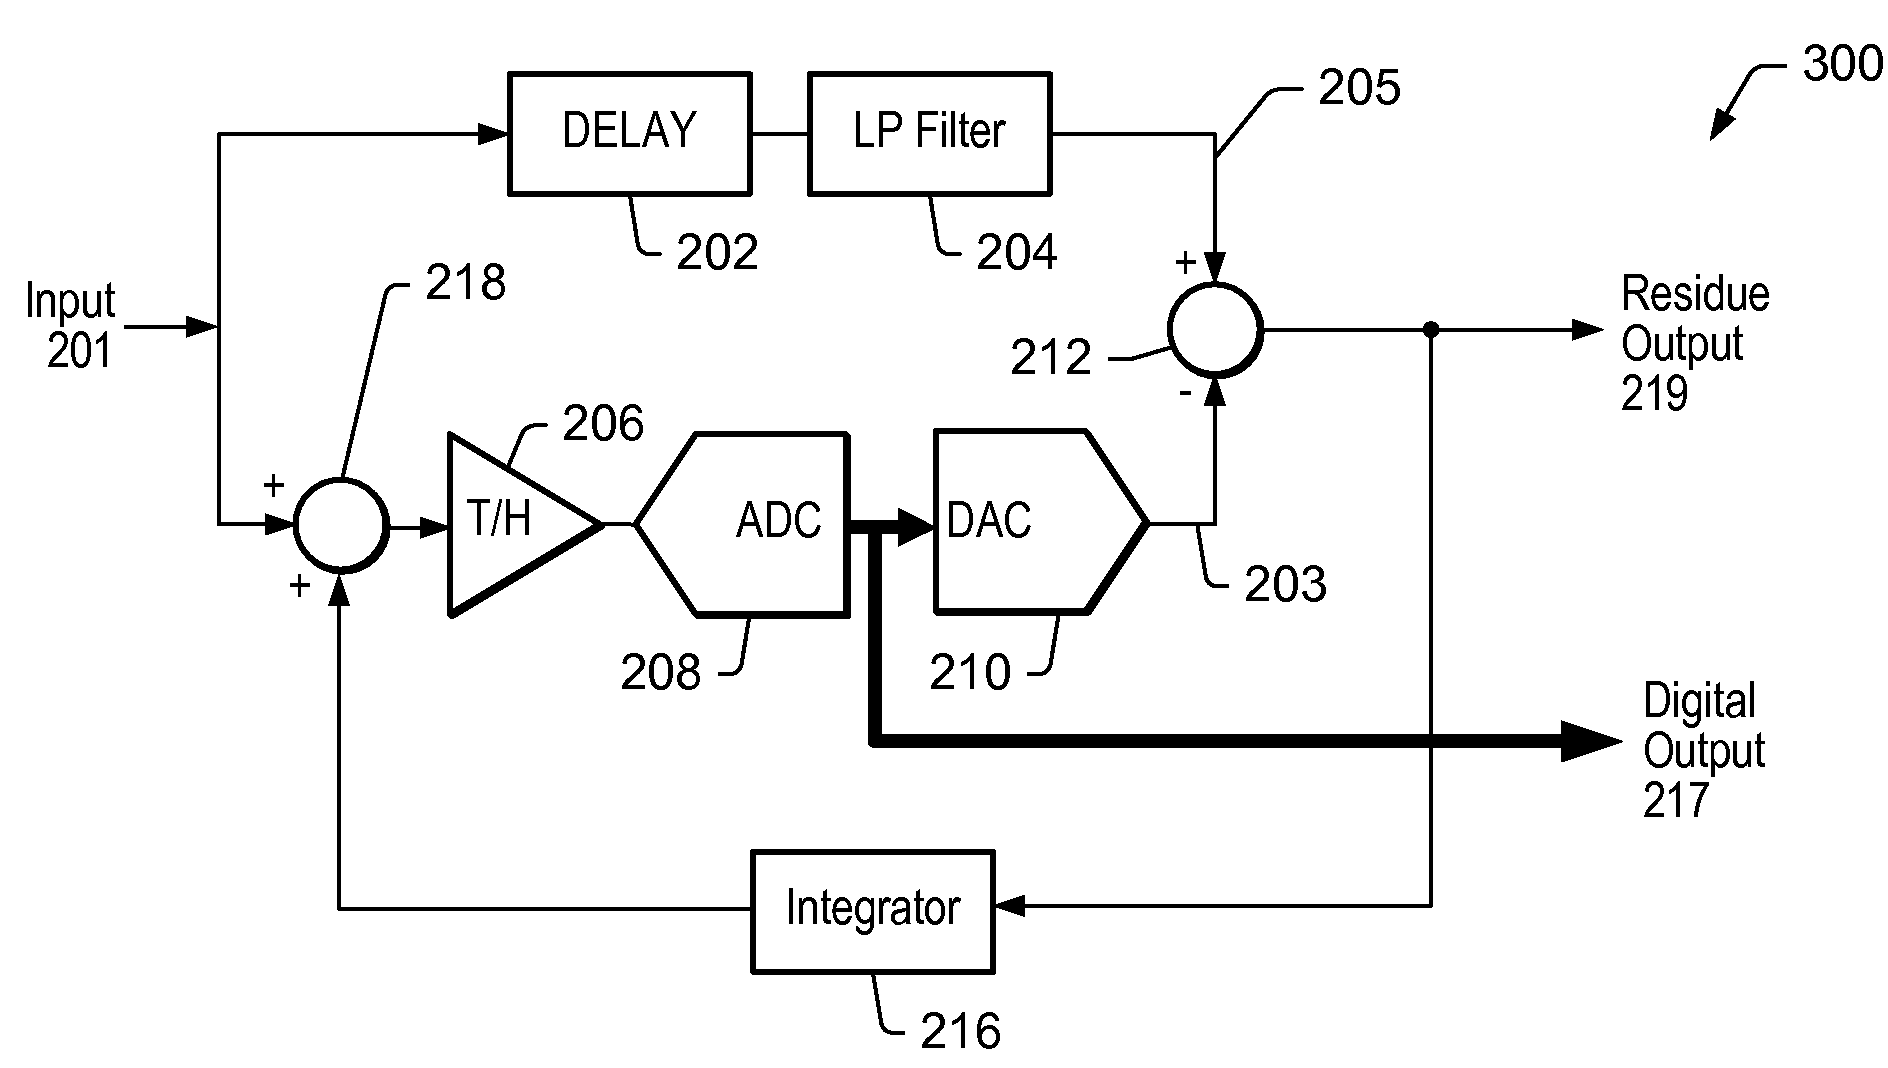 Time continuous pipeline analog-to-digital converter